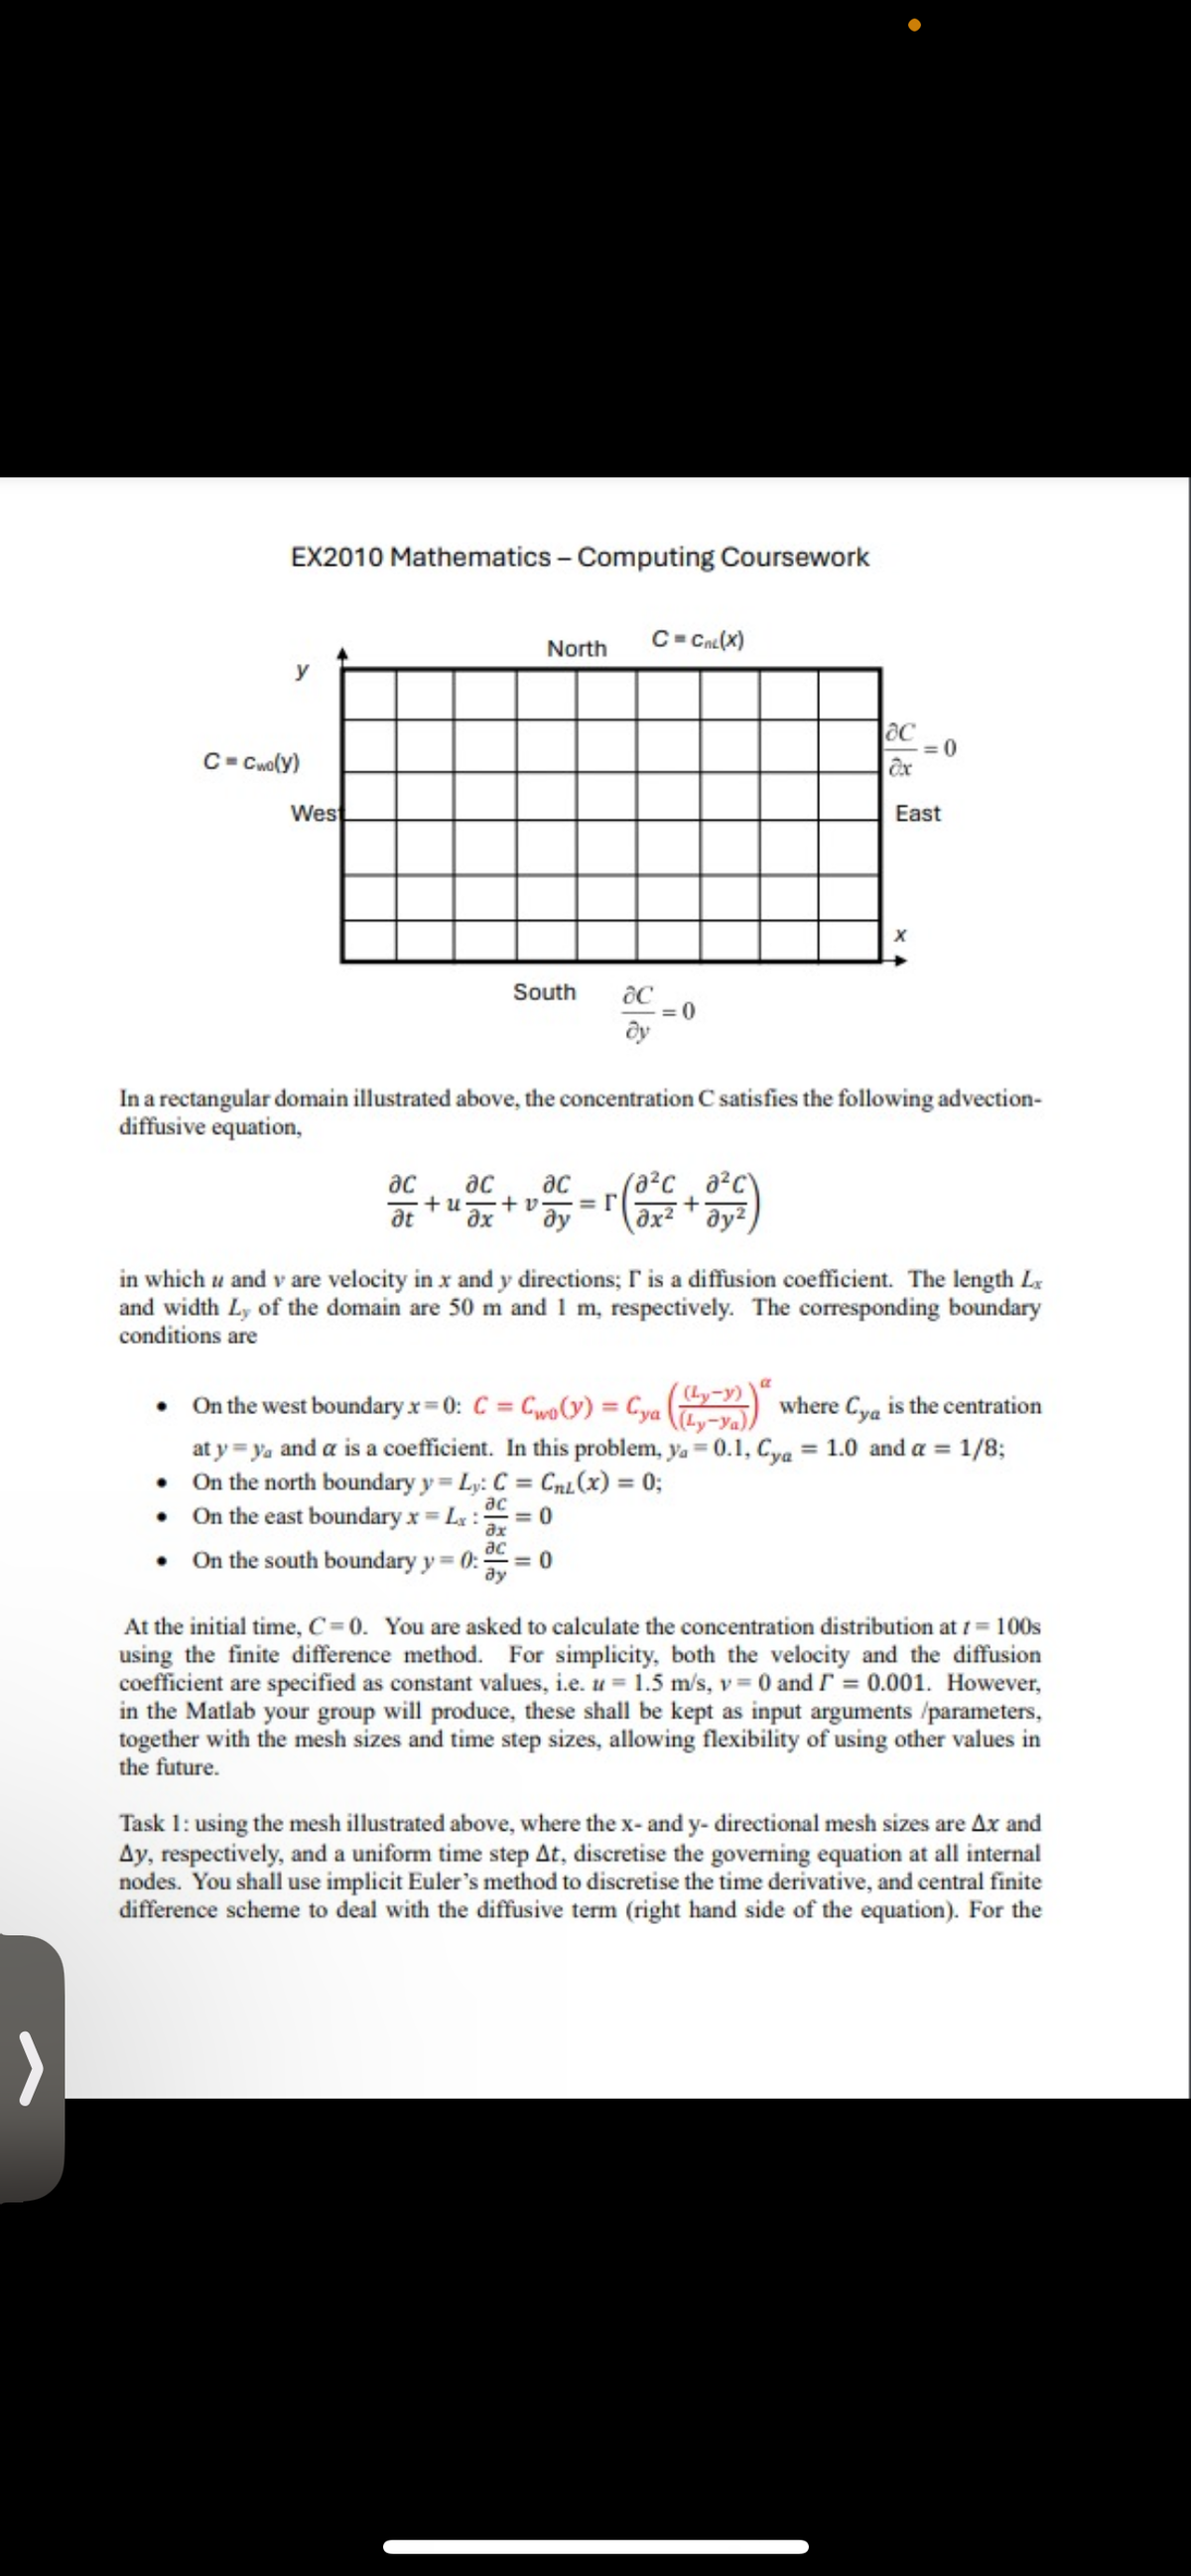 EX2010 Mathematics - Computing Coursework
C-Cwo(y)
West
North
C=Cnc (X)
South
дс
= 0
By
Oc
=0
ax
East
x
In a rectangular domain illustrated above, the concentration C satisfies the following advection-
diffusive equation,
ac ac (a²c a²c\
ас
at
ax
+u+v. =Г
ду
+
in which u and v are velocity in x and y directions; I' is a diffusion coefficient. The length L
and width Ly of the domain are 50 m and 1 m, respectively. The corresponding boundary
conditions are
a
On the west boundary x=0: C = Cwo(y) = Cya (y-1)) where Cya is the centration
at y ya and a is a coefficient. In this problem, ya=0.1, Cya = 1.0 and α = 1/8;
⚫ On the north boundary y = Ly: C
⚫ On the east boundary x = Lx: = 0
= CnL(x) = 0;
ac
ax
⚫ On the south boundary y = 0:3
дс
= 0
ay
At the initial time, C=0. You are asked to calculate the concentration distribution at /= 100s
using the finite difference method. For simplicity, both the velocity and the diffusion
coefficient are specified as constant values, i.e. u = 1.5 m/s, v = 0 and = 0.001. However,
in the Matlab your group will produce, these shall be kept as input arguments /parameters,
together with the mesh sizes and time step sizes, allowing flexibility of using other values in
the future.
Task 1: using the mesh illustrated above, where the x- and y- directional mesh sizes are Ax and
Ay, respectively, and a uniform time step At, discretise the governing equation at all internal
nodes. You shall use implicit Euler's method to discretise the time derivative, and central finite
difference scheme to deal with the diffusive term (right hand side of the equation). For the